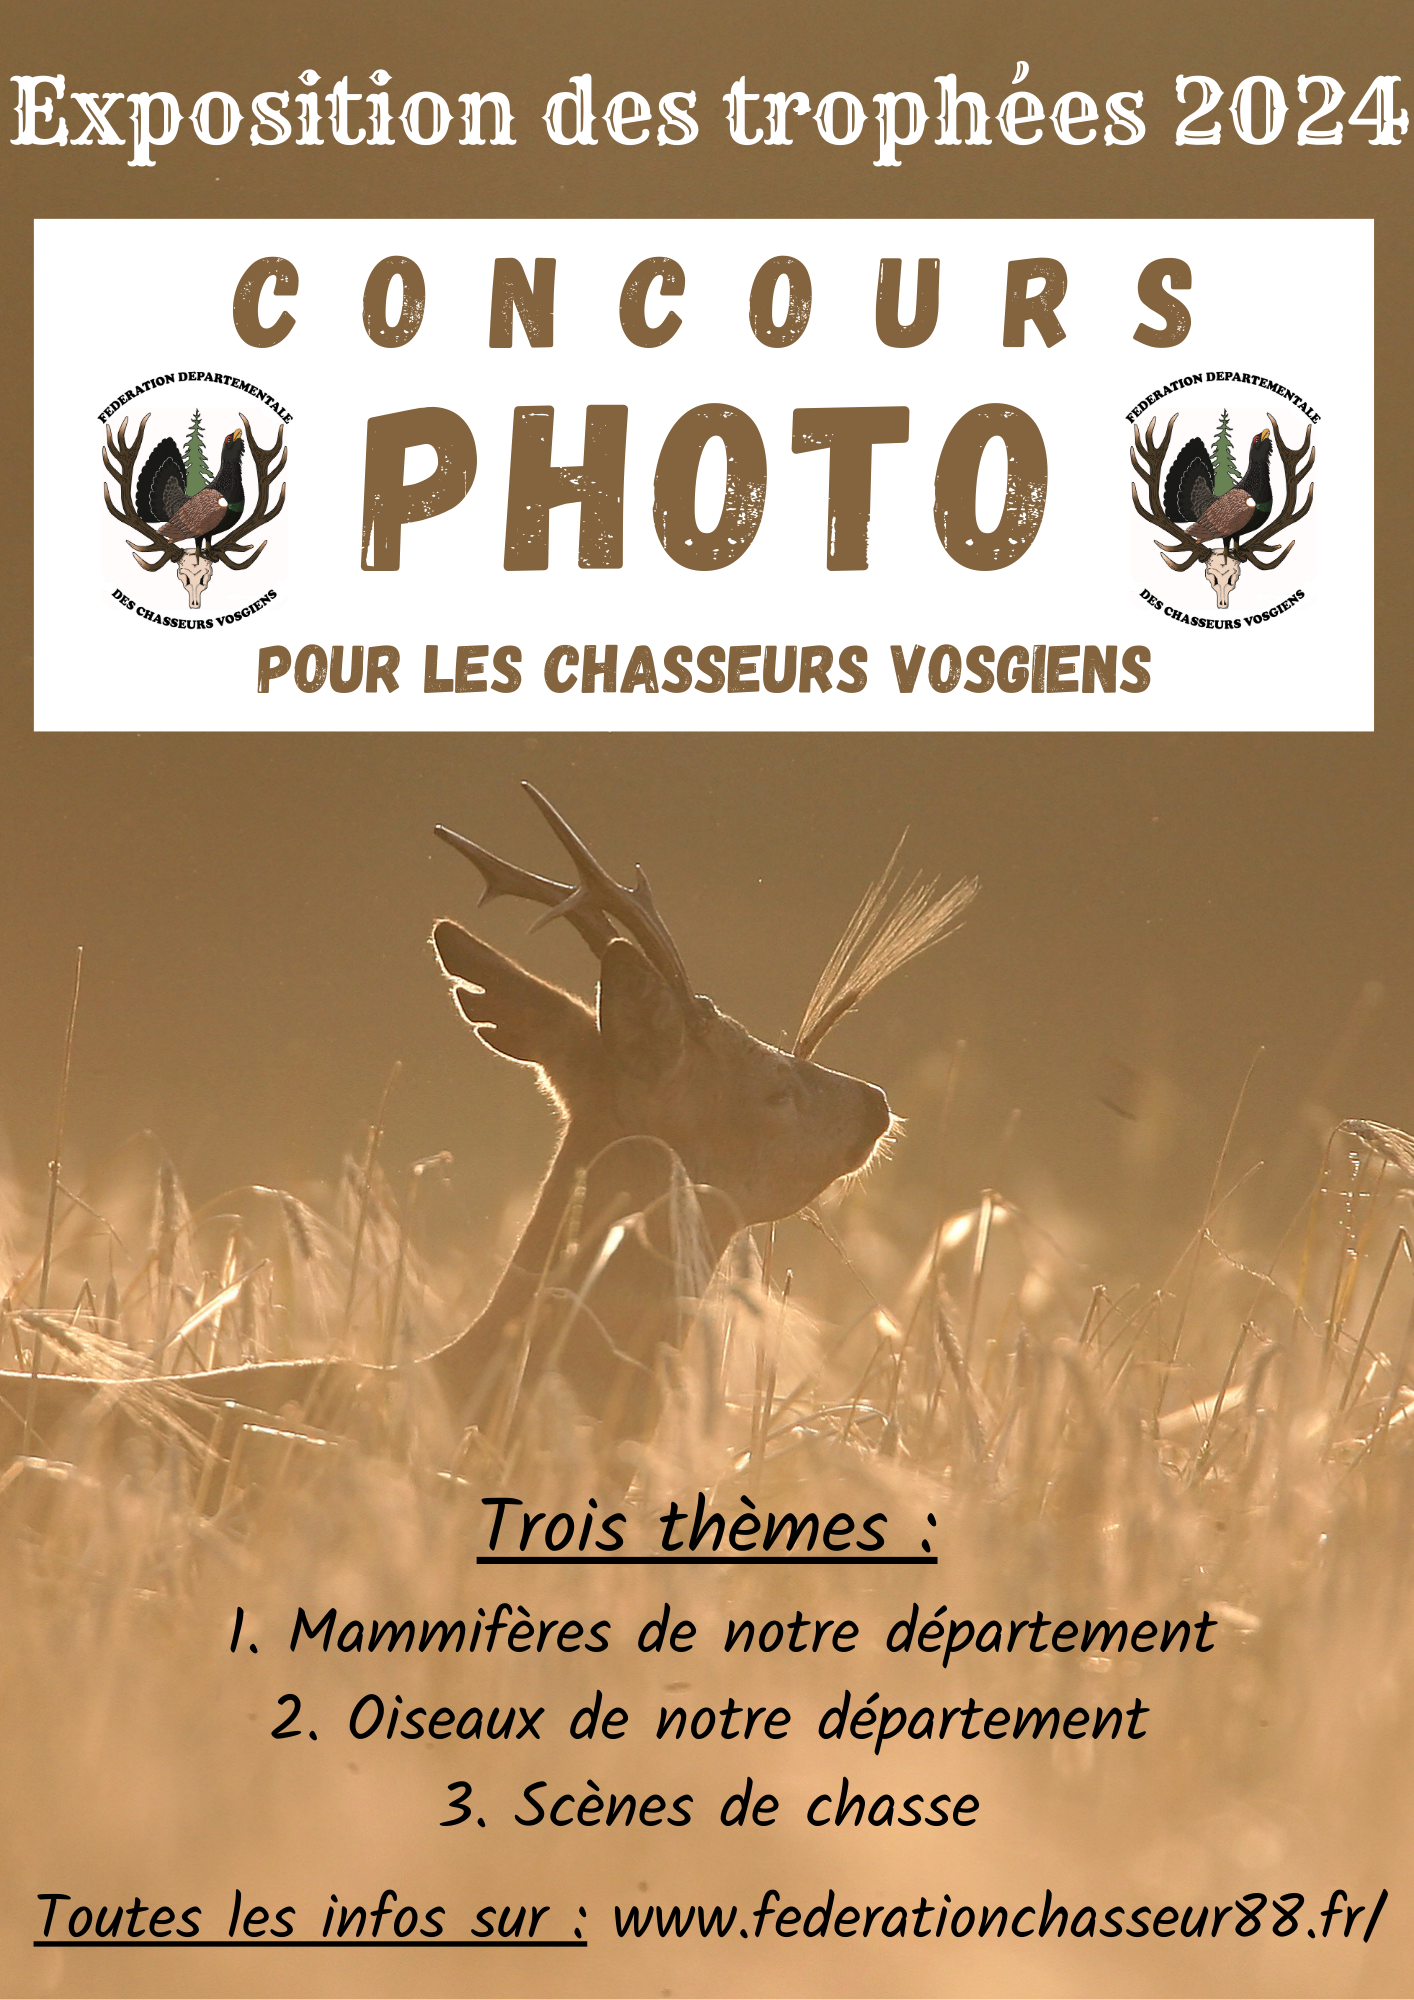 http://www.federationchasseur88.fr/Files/125547/Img/08/Affiche-concours-photo-2024.png